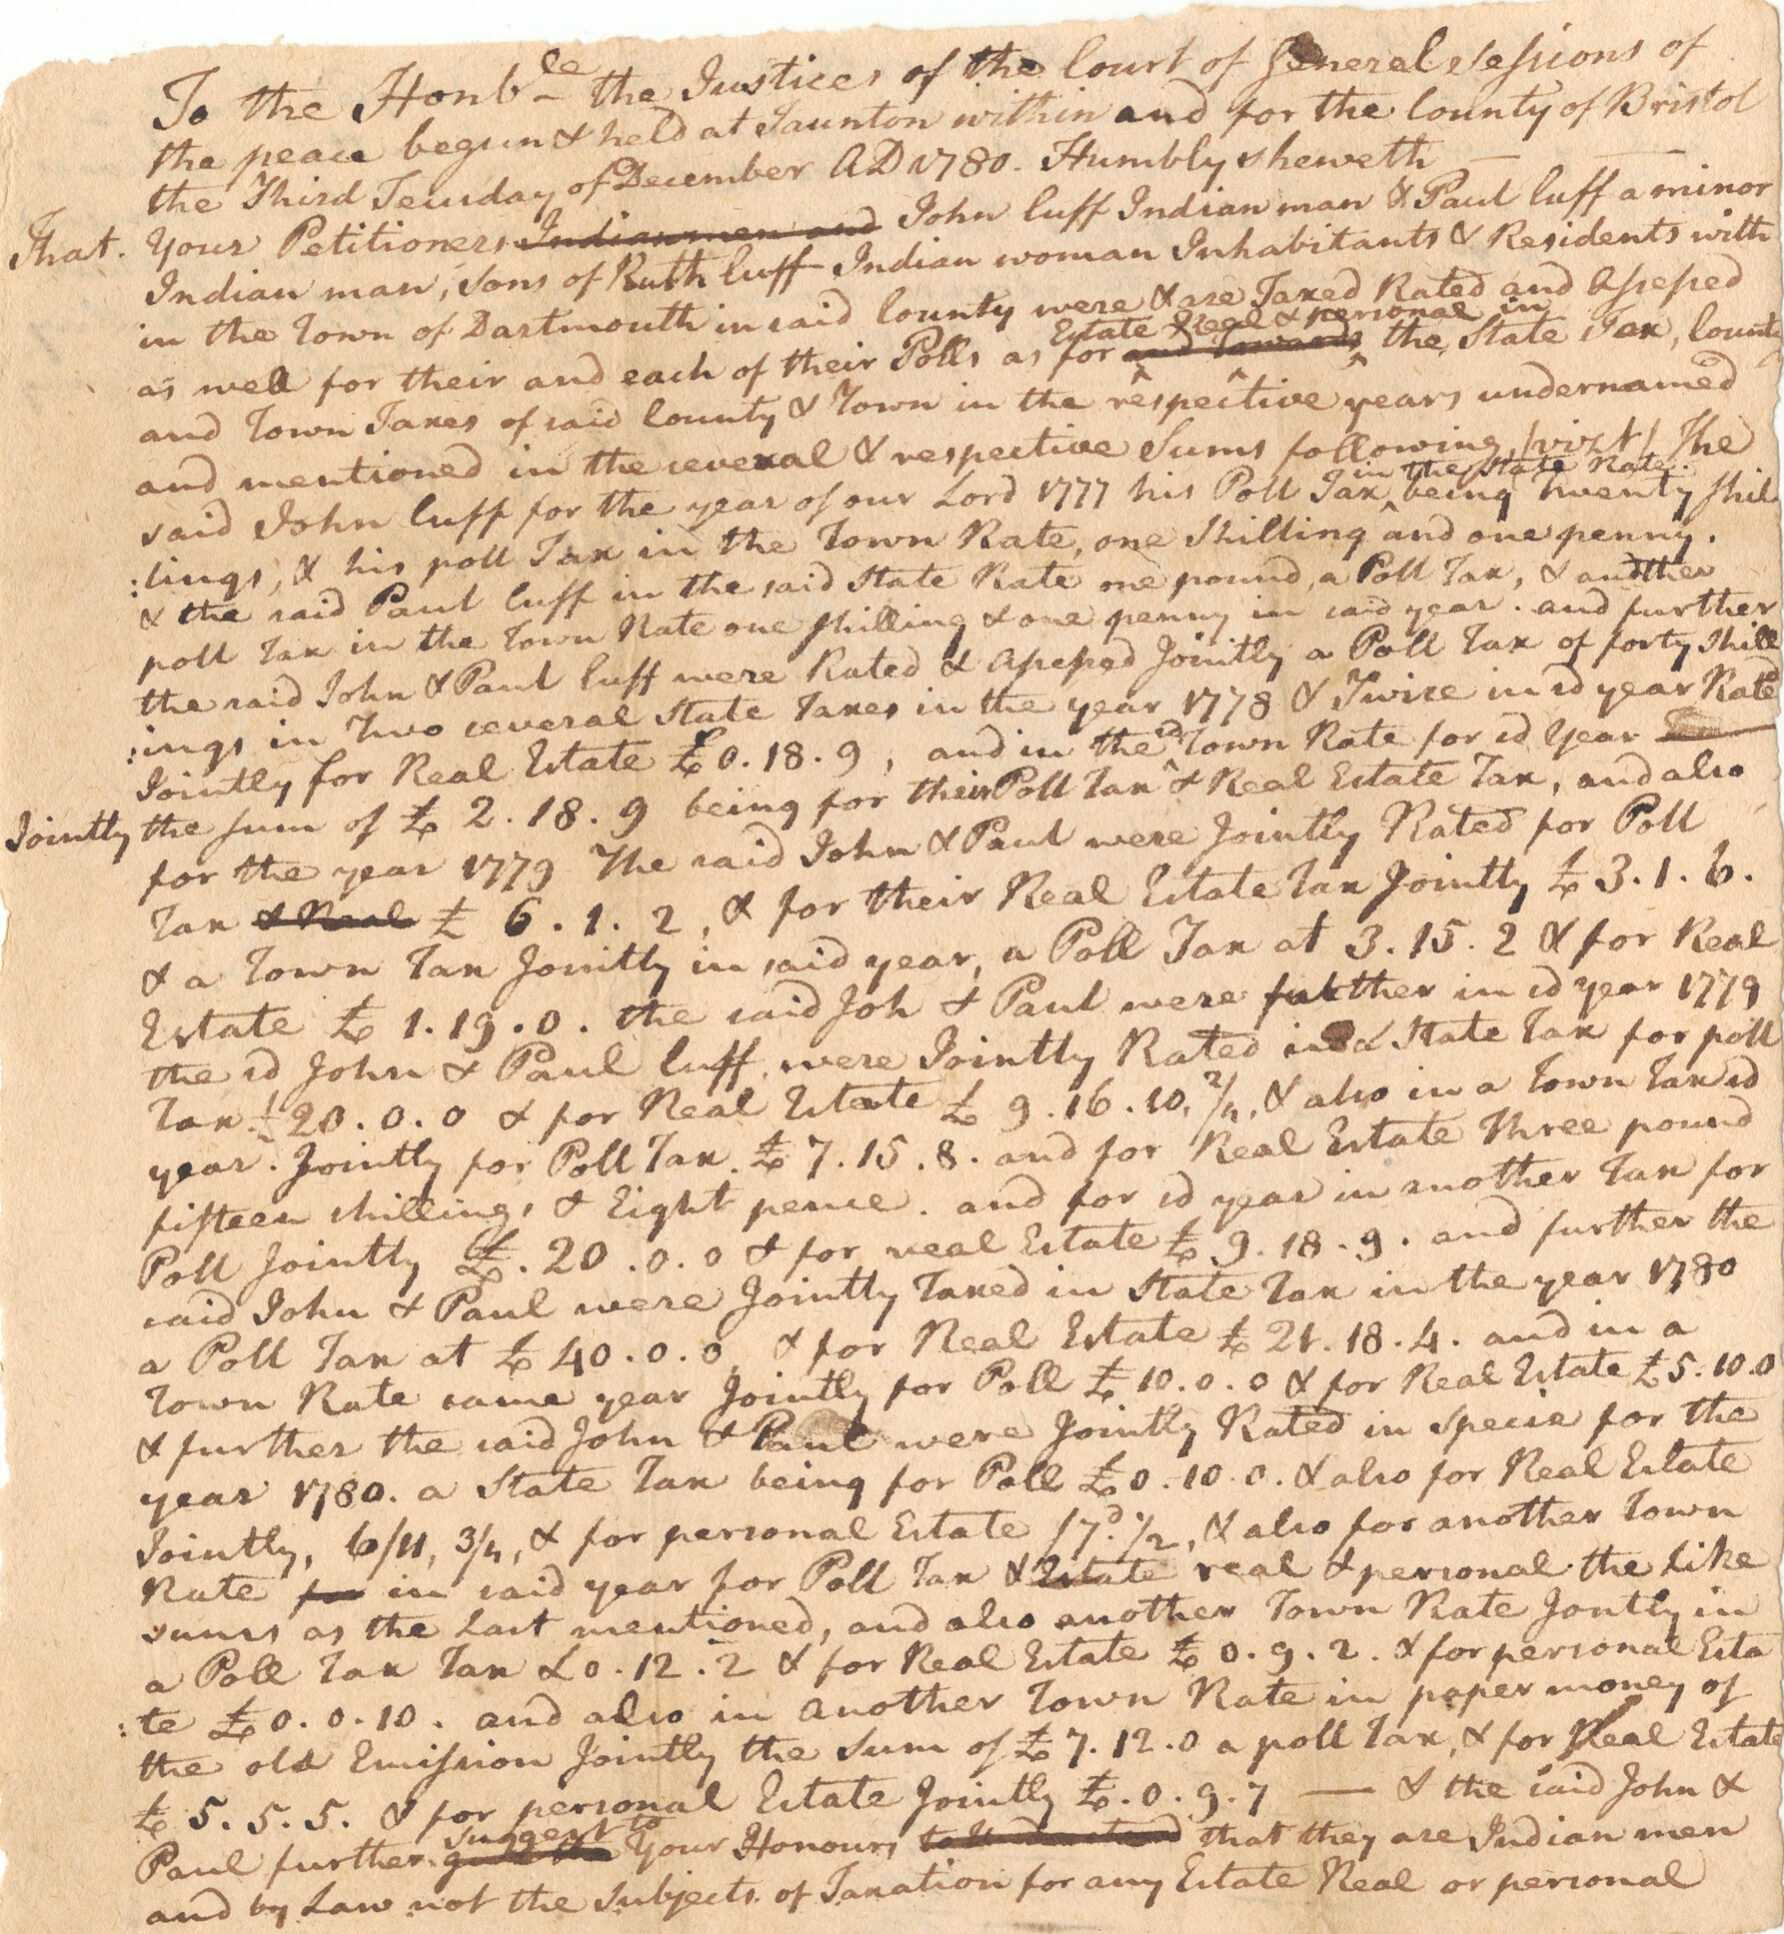 A petition to the court of Bristol County, Massachusetts, in Taunton written by an unidentified hand and signed by John Cuffe and Paul Cuffe. The text is handwritten in black ink on the front and back sides of a single sheet of off-white paper. The petition is in regards to taxation by the state upon the signatories, who being of Native American descent, are arguing they are therefore not subject to such taxation. The document begins [Humbly sheweth that your Petitioners John Cuff Indian man & Paul Cuff a minor Indian man, Sons of Ruth Cuff Indian woman Inhabitants & Residents within the Town of Dartmouth] and the document ends [the said John & Paul further suggest to your Honour that they are Indian men and by Law not the subjects of
Taxation for any Estate Real or personal and Humbly Pray Your Honor that as they are assessed jointly a Double Poll Tax & the said Paul is a minor for whom the said John is not by Law responsible or chargeable that the said Poll Taxes aforesaid and also all and Singular Taxes aforesaid on their and Each of their Real or Personal Estate aforesaid may be Abated to them & they allowed their Reasonable Costs and as in Duty Bound shall pray.]. The signatures of John Cuffe and Paul Cuffe are on the top right section of the verso. Also on the verso are several notations in a different hand, including [The Petition of John and Paul Cuffe] at center.